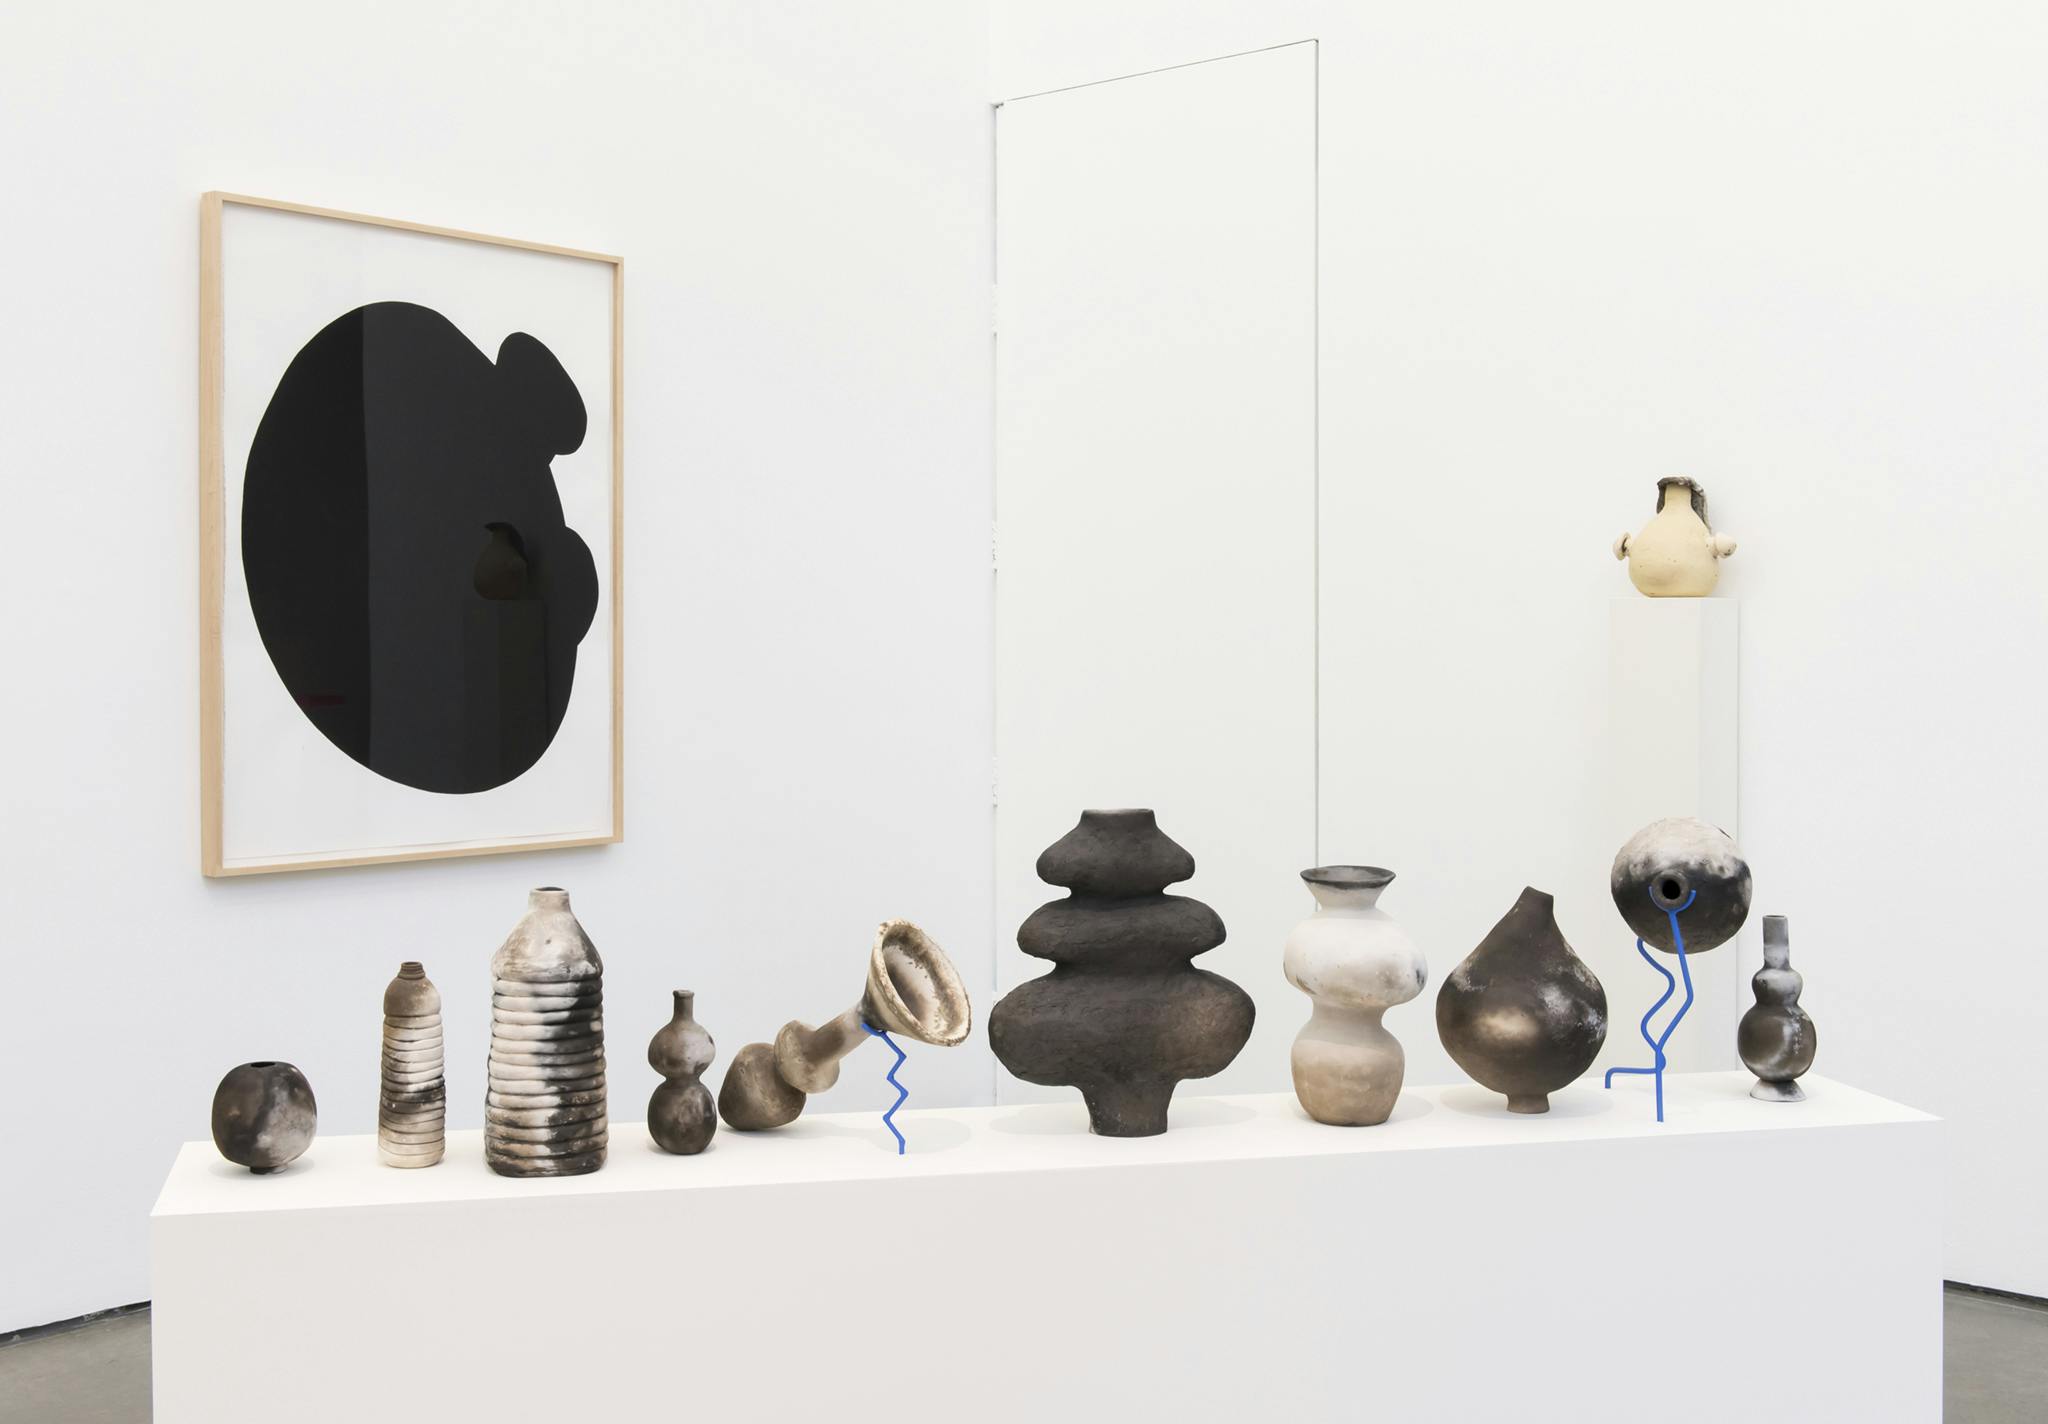 Ten ceramic sculptures of various shaped bottles sit on top of a long rectangular plinth. Behind the plinth, a large black and white painting hangs and another sculpture on a tall plinth to the right.